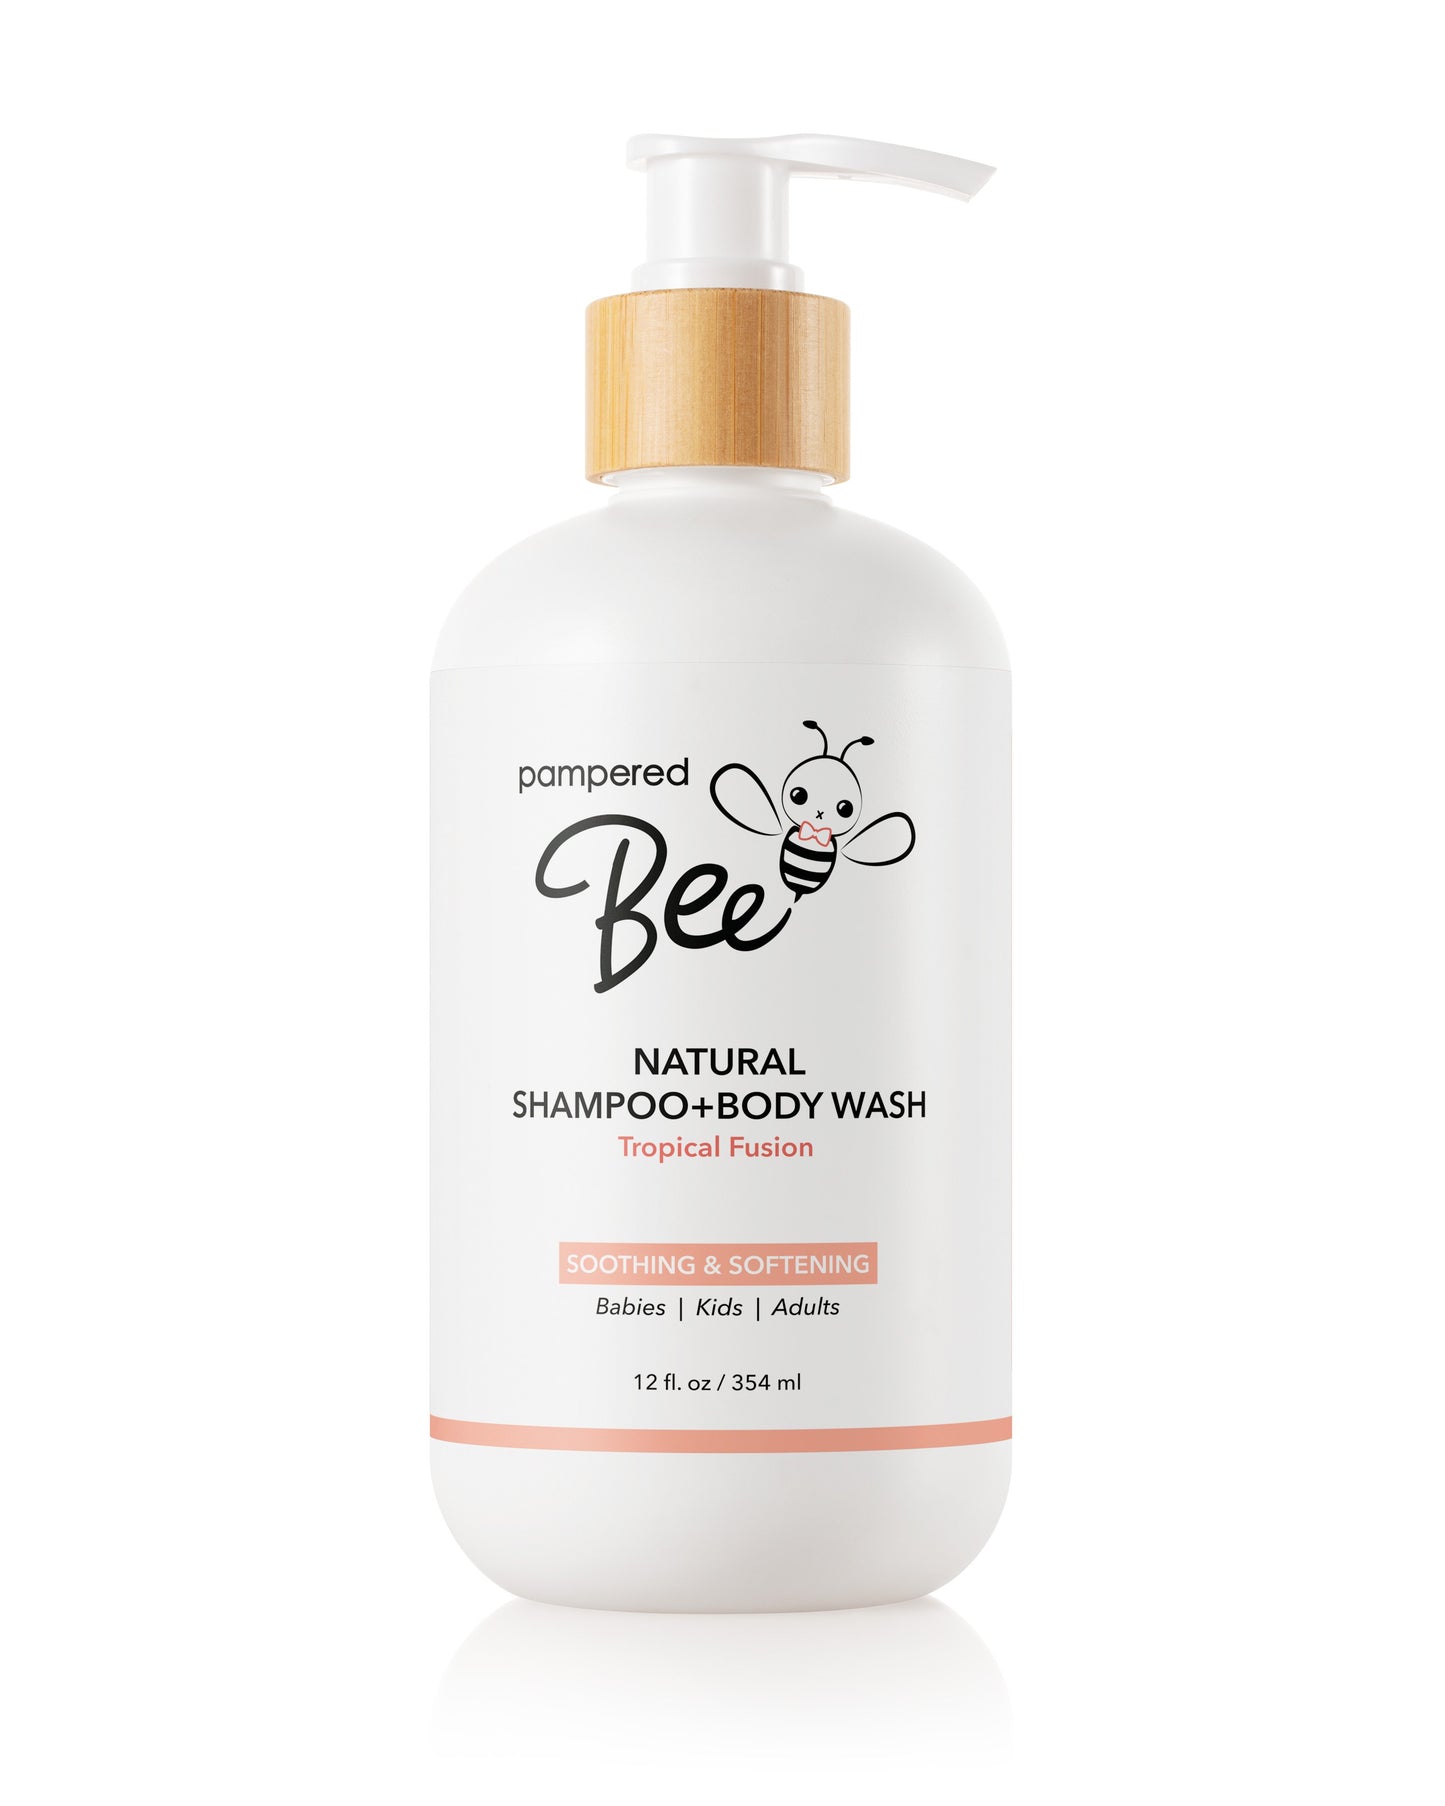 Pampered Bee’s Shampoo + Body Wash Tropical Fusion